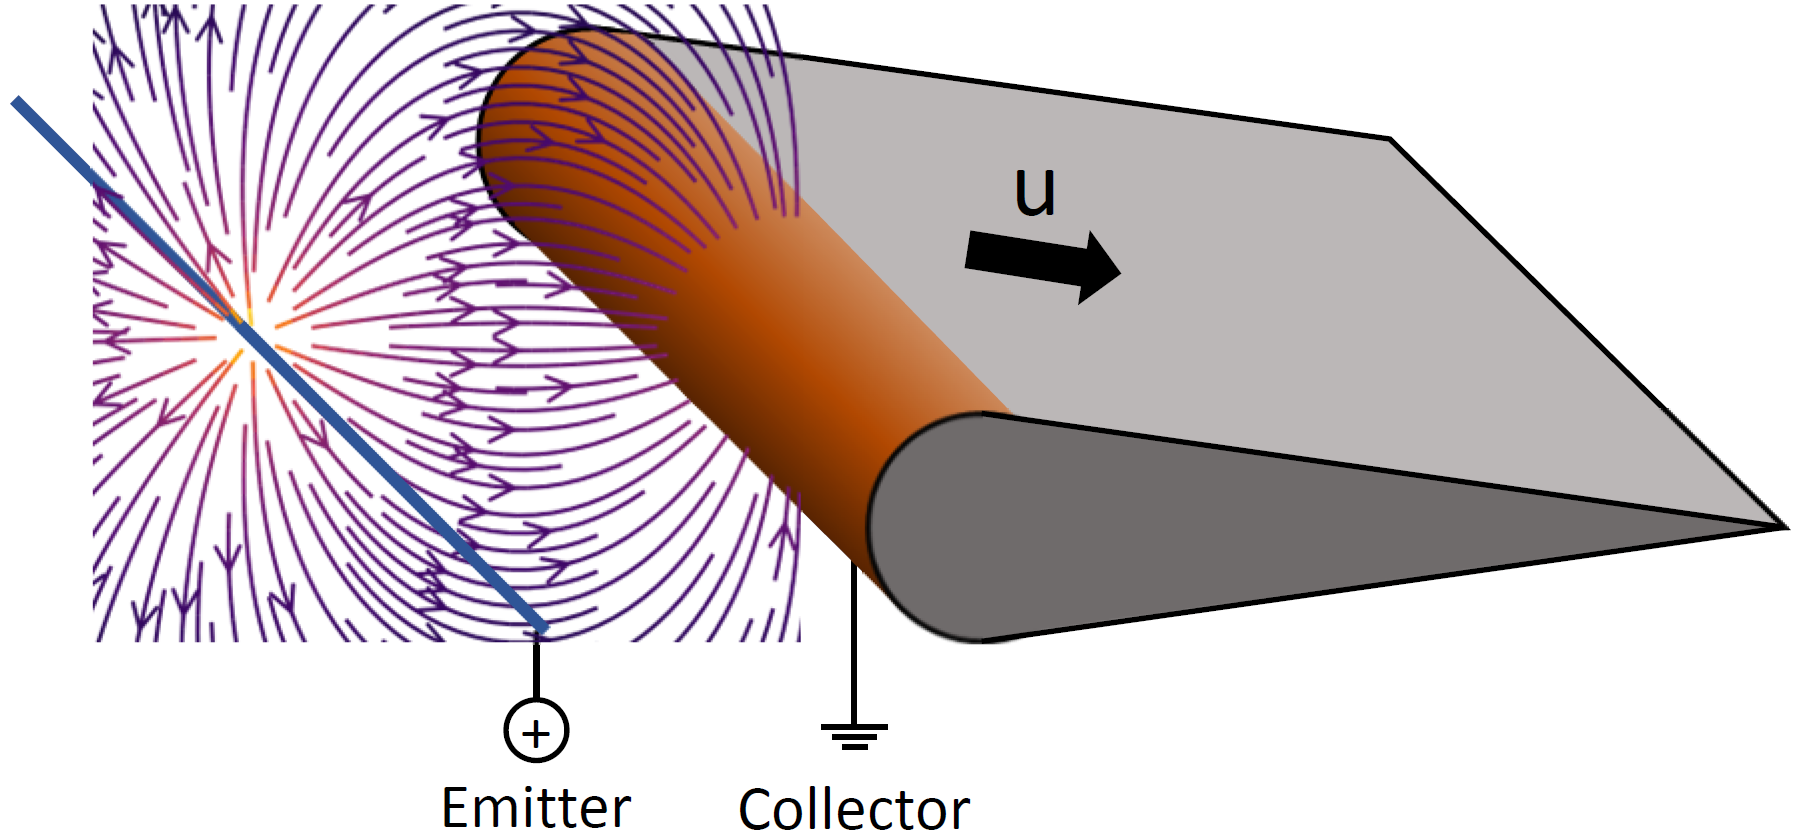 Sketch of the electric field around a corona-discharge-based ionic propulsion device.